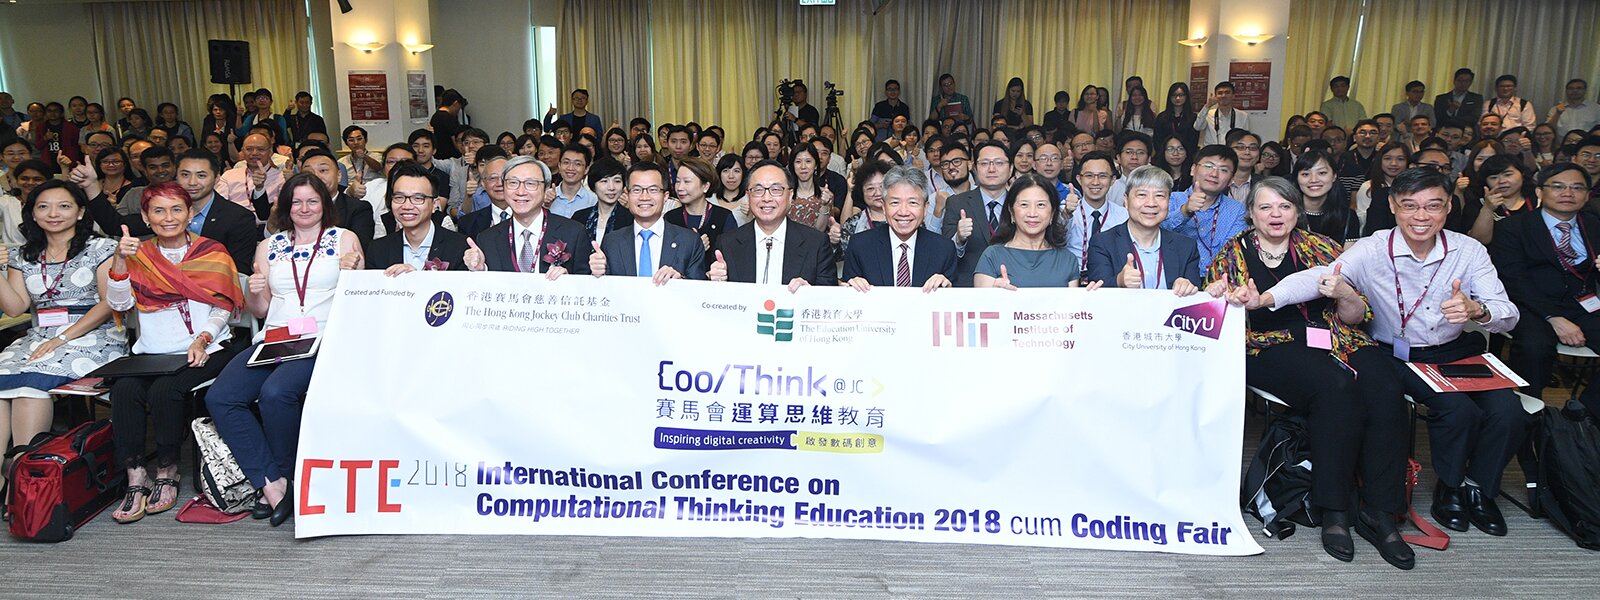 International Conference on Computational Thinking Education 2018 and Coding Fair & Press Conference on Opening Up of CoolThink@JC Educational Resources